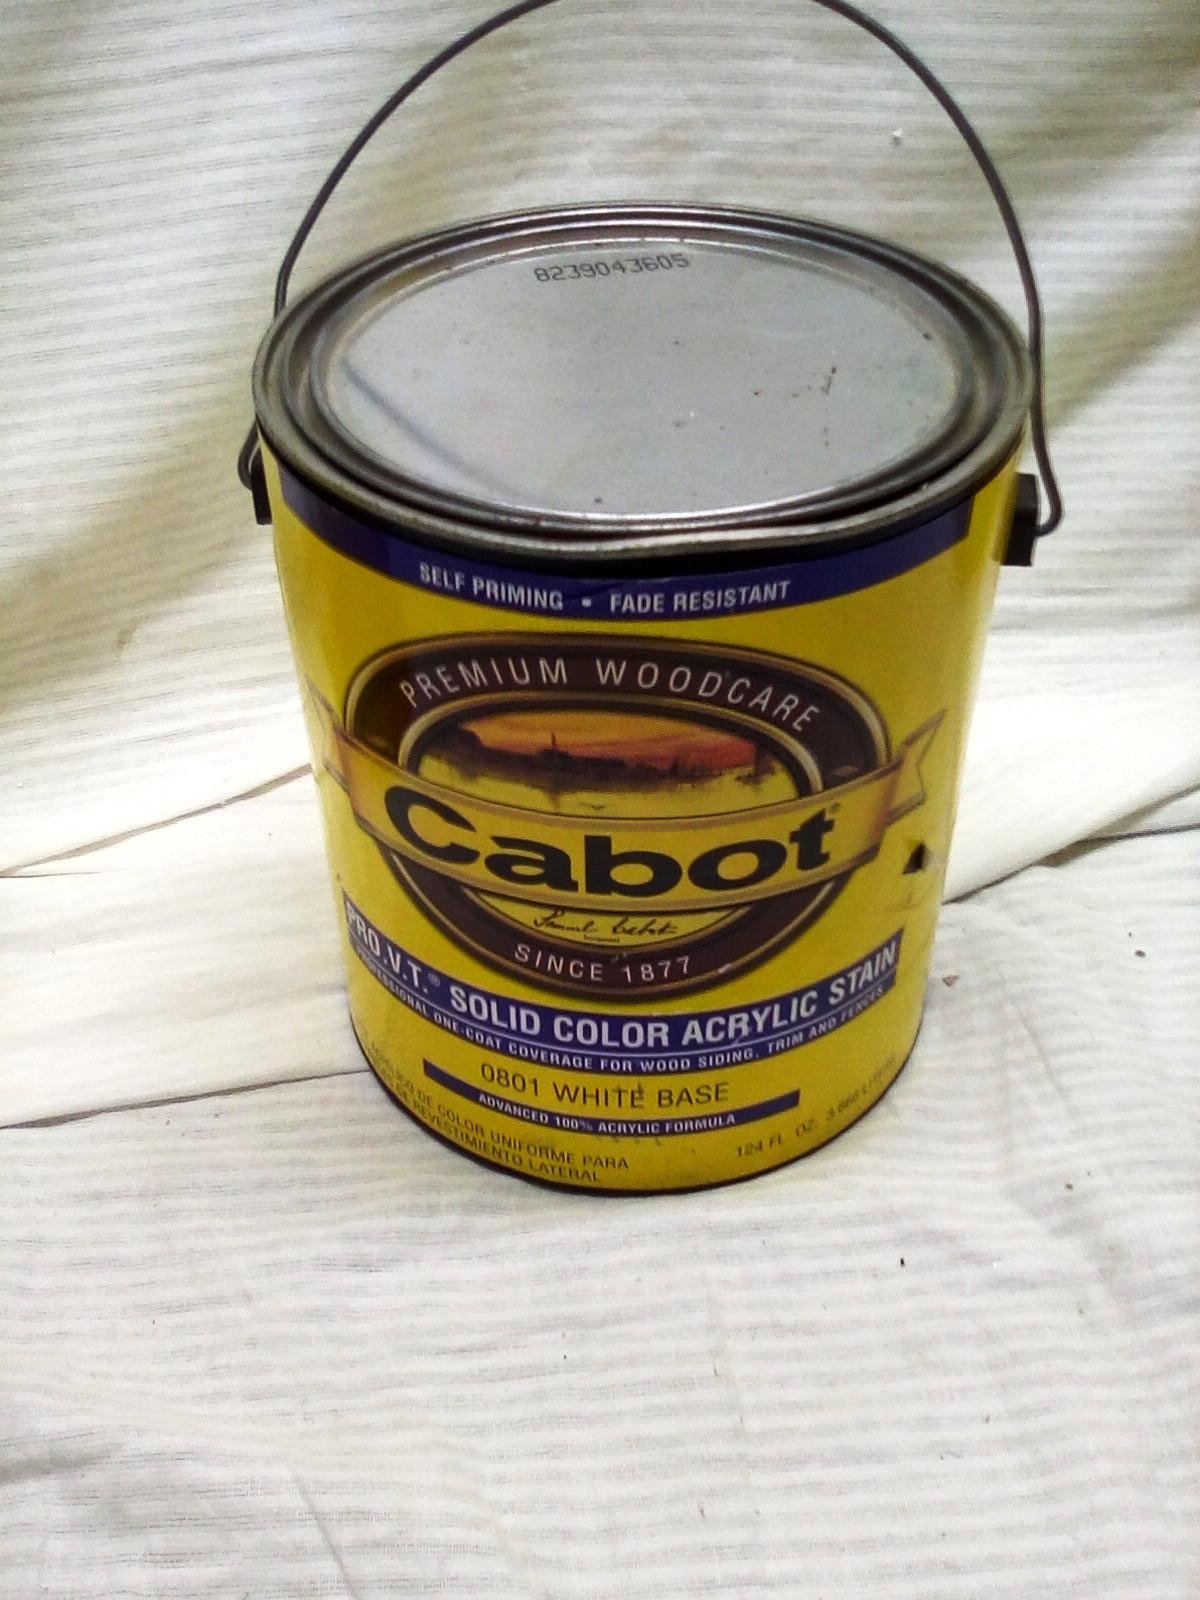 Cabot Pro VT Solid Color Acrylic Stain 0801 White Base